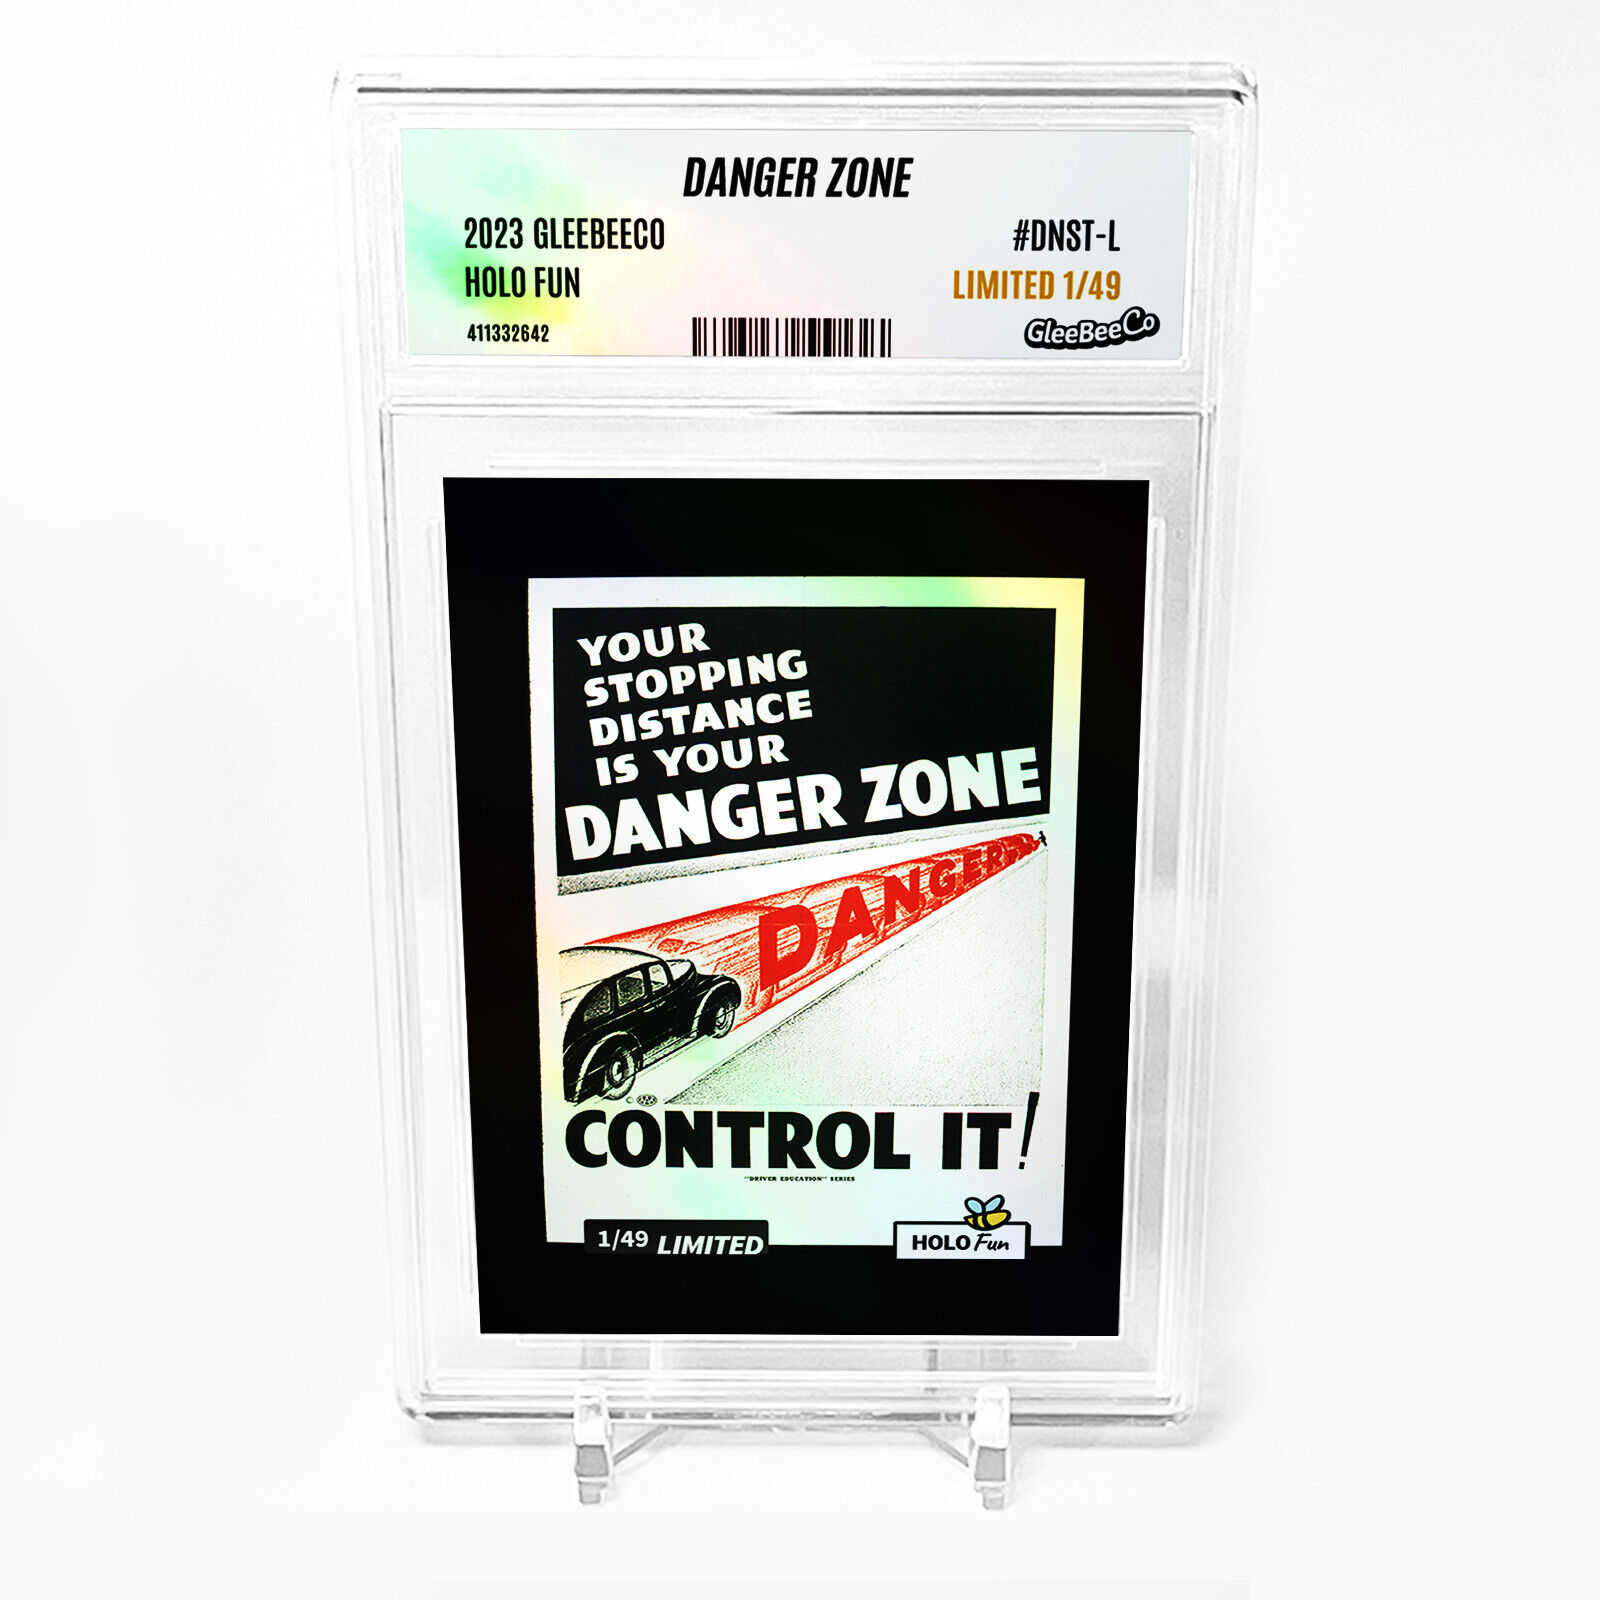 DANGER ZONE Stopping Distance Card 2023 GleeBeeCo Holo Fun #DNST-L /49